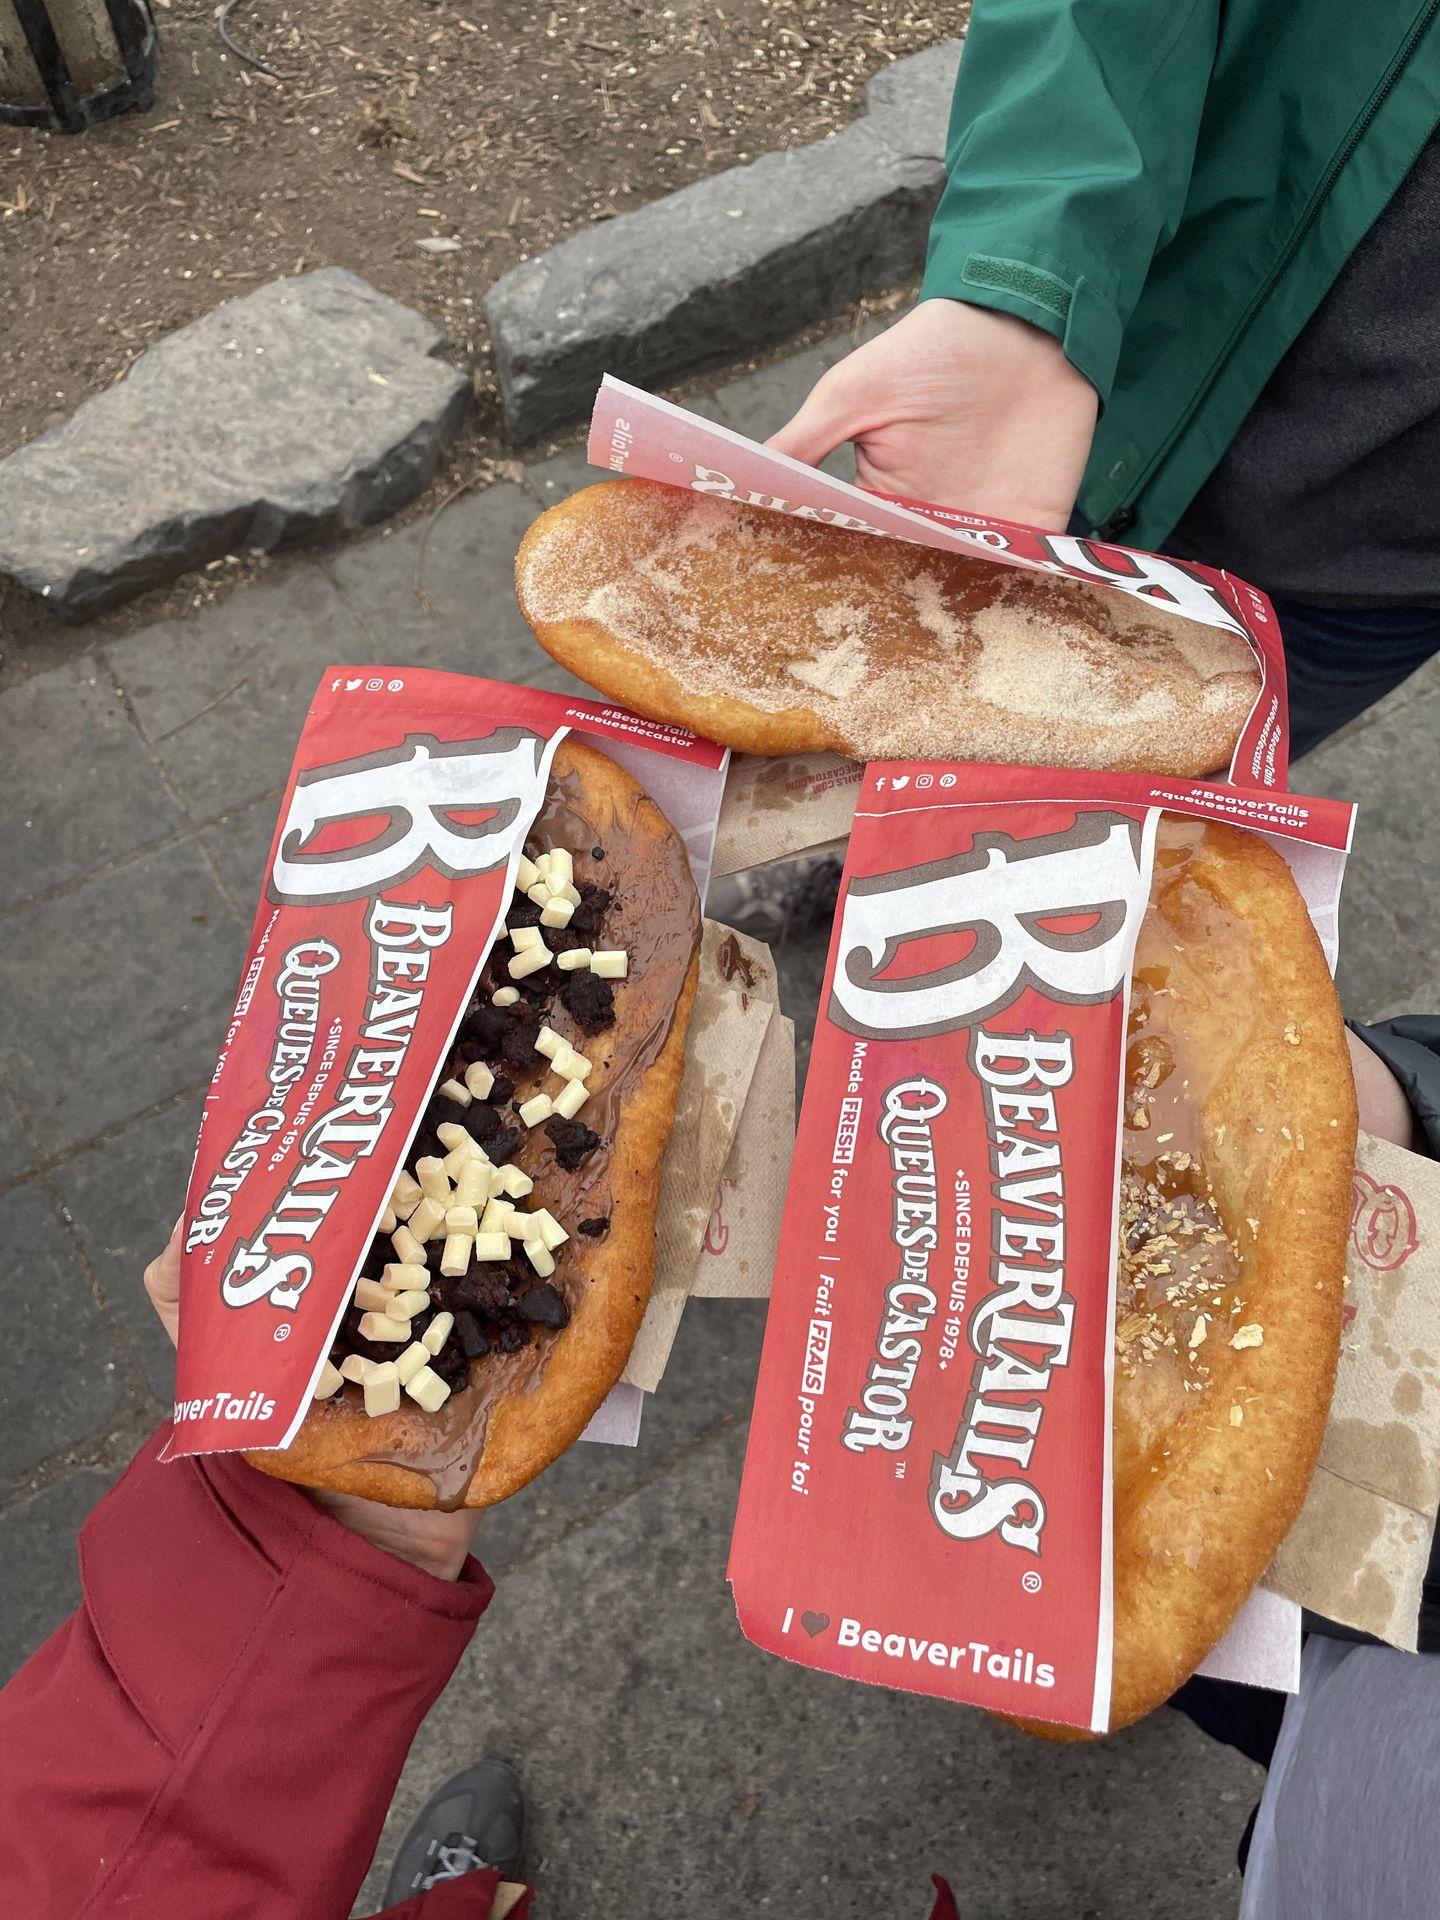 3 BeaverTails being held up, one has nutella and the others have cinnamon sugar.